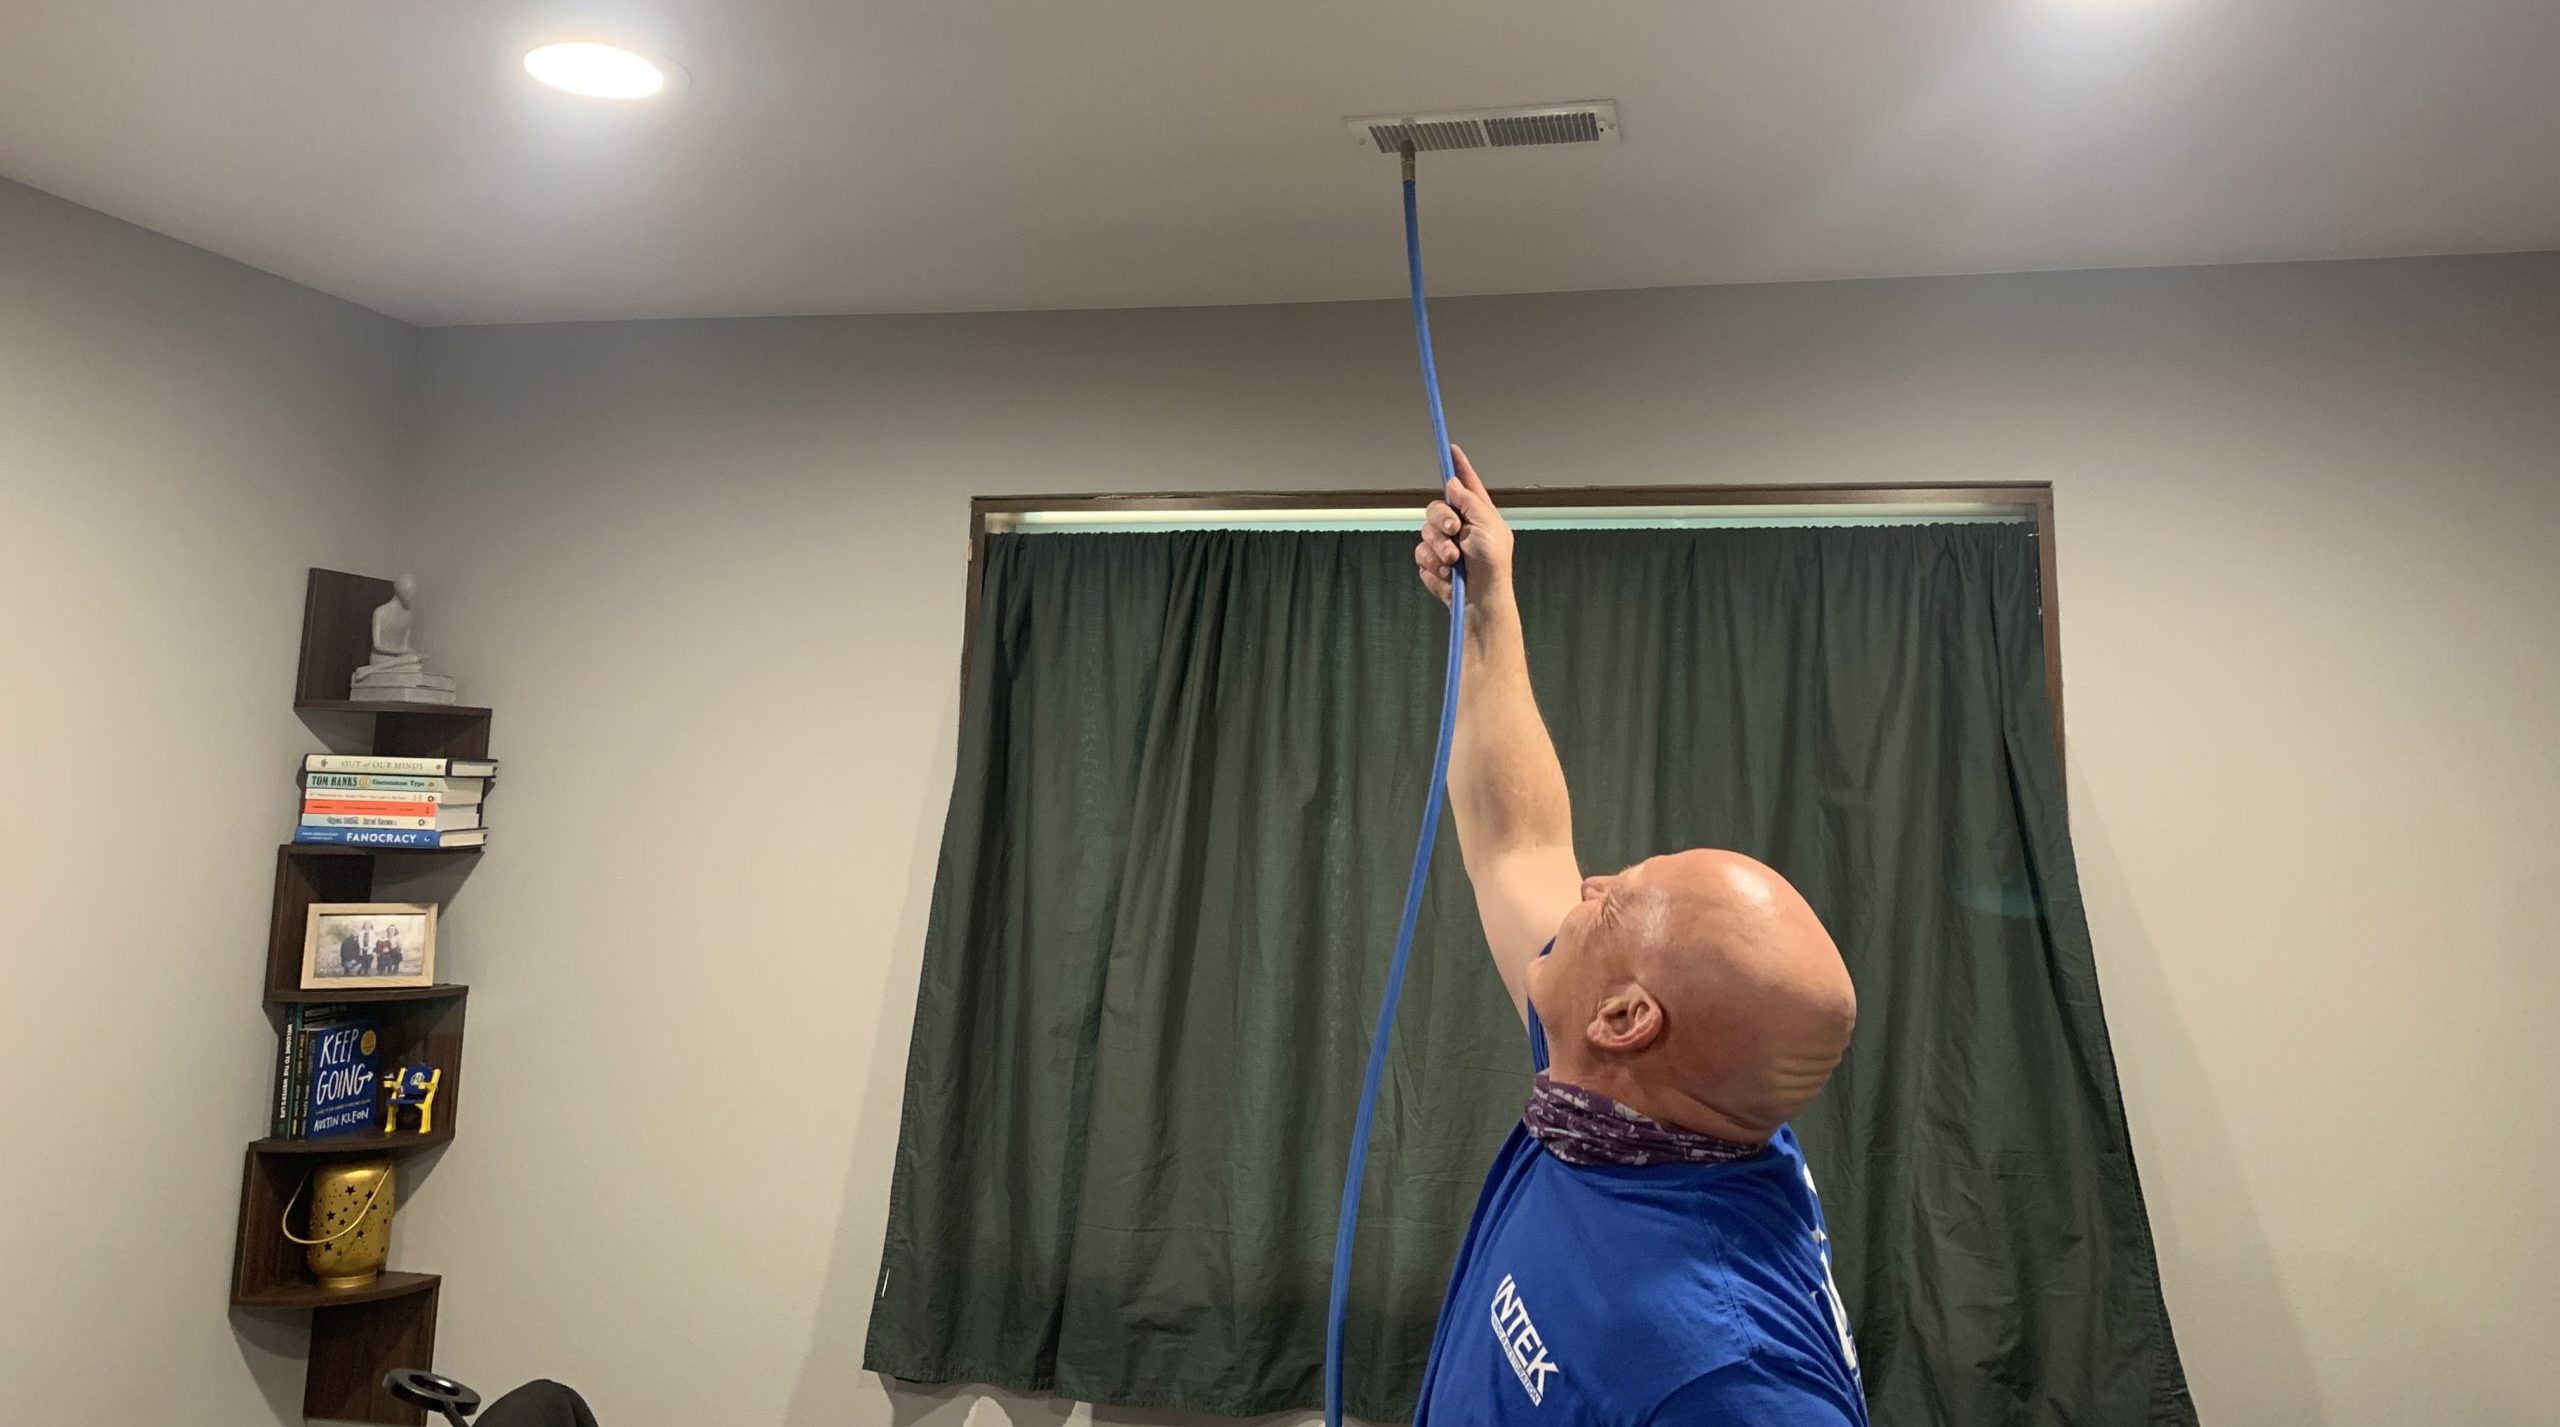 https://intekclean.com/service/furnace-duct-cleaning/